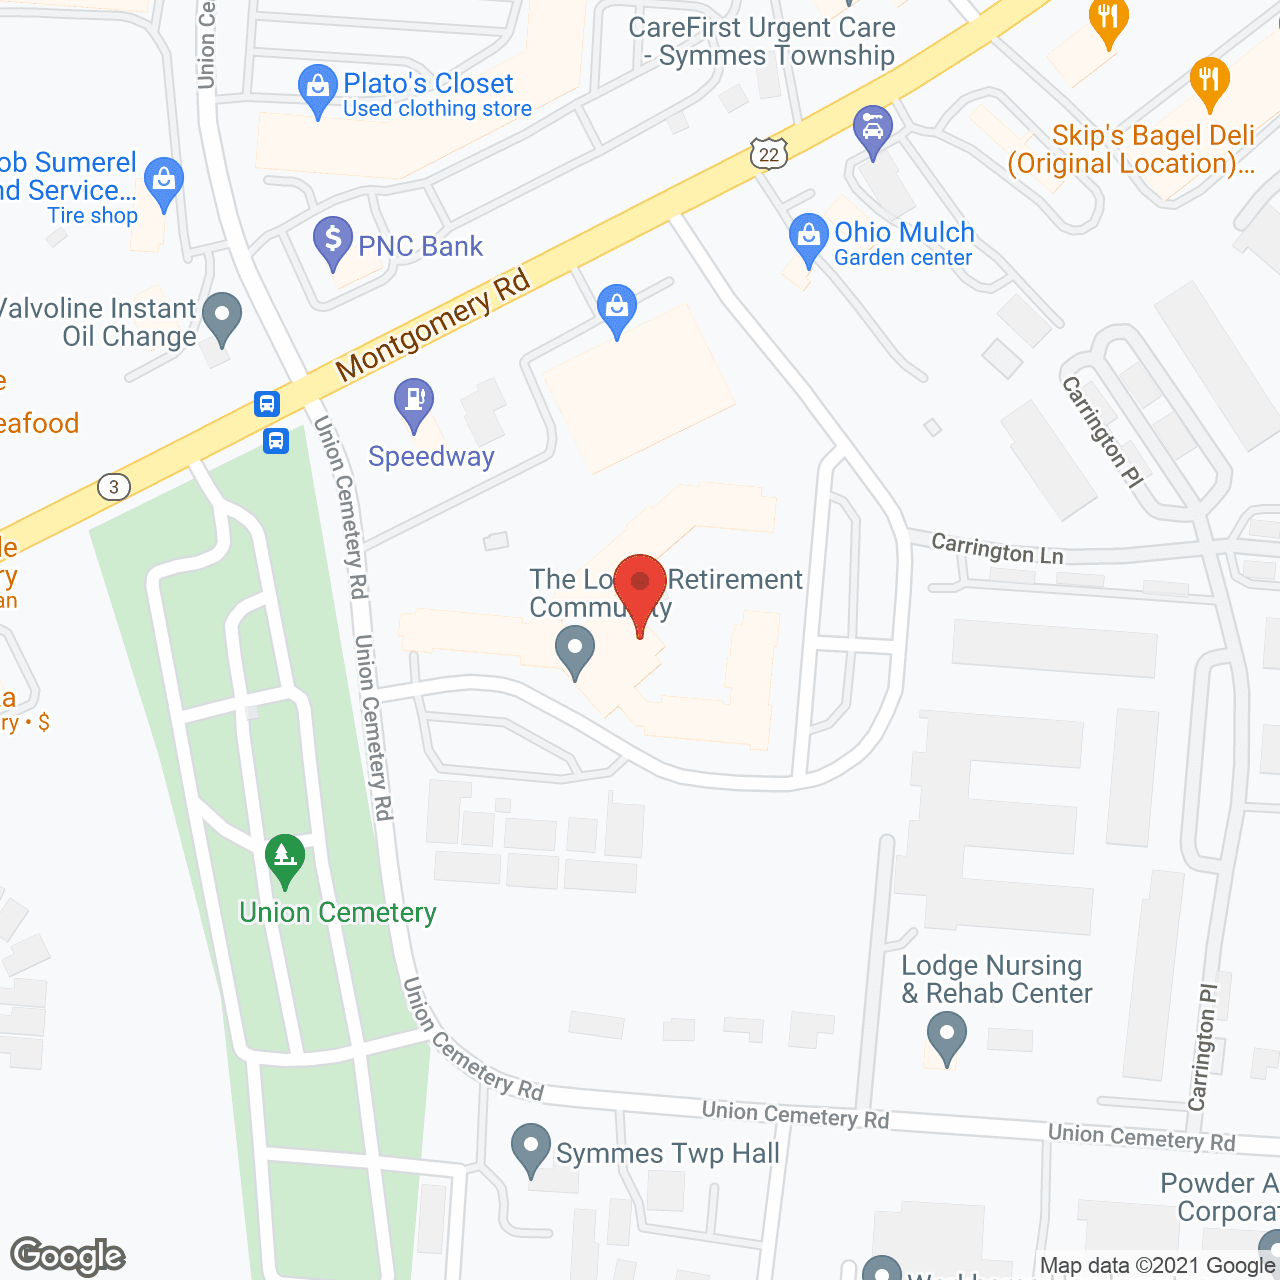 The Lodge Retirement Community in google map